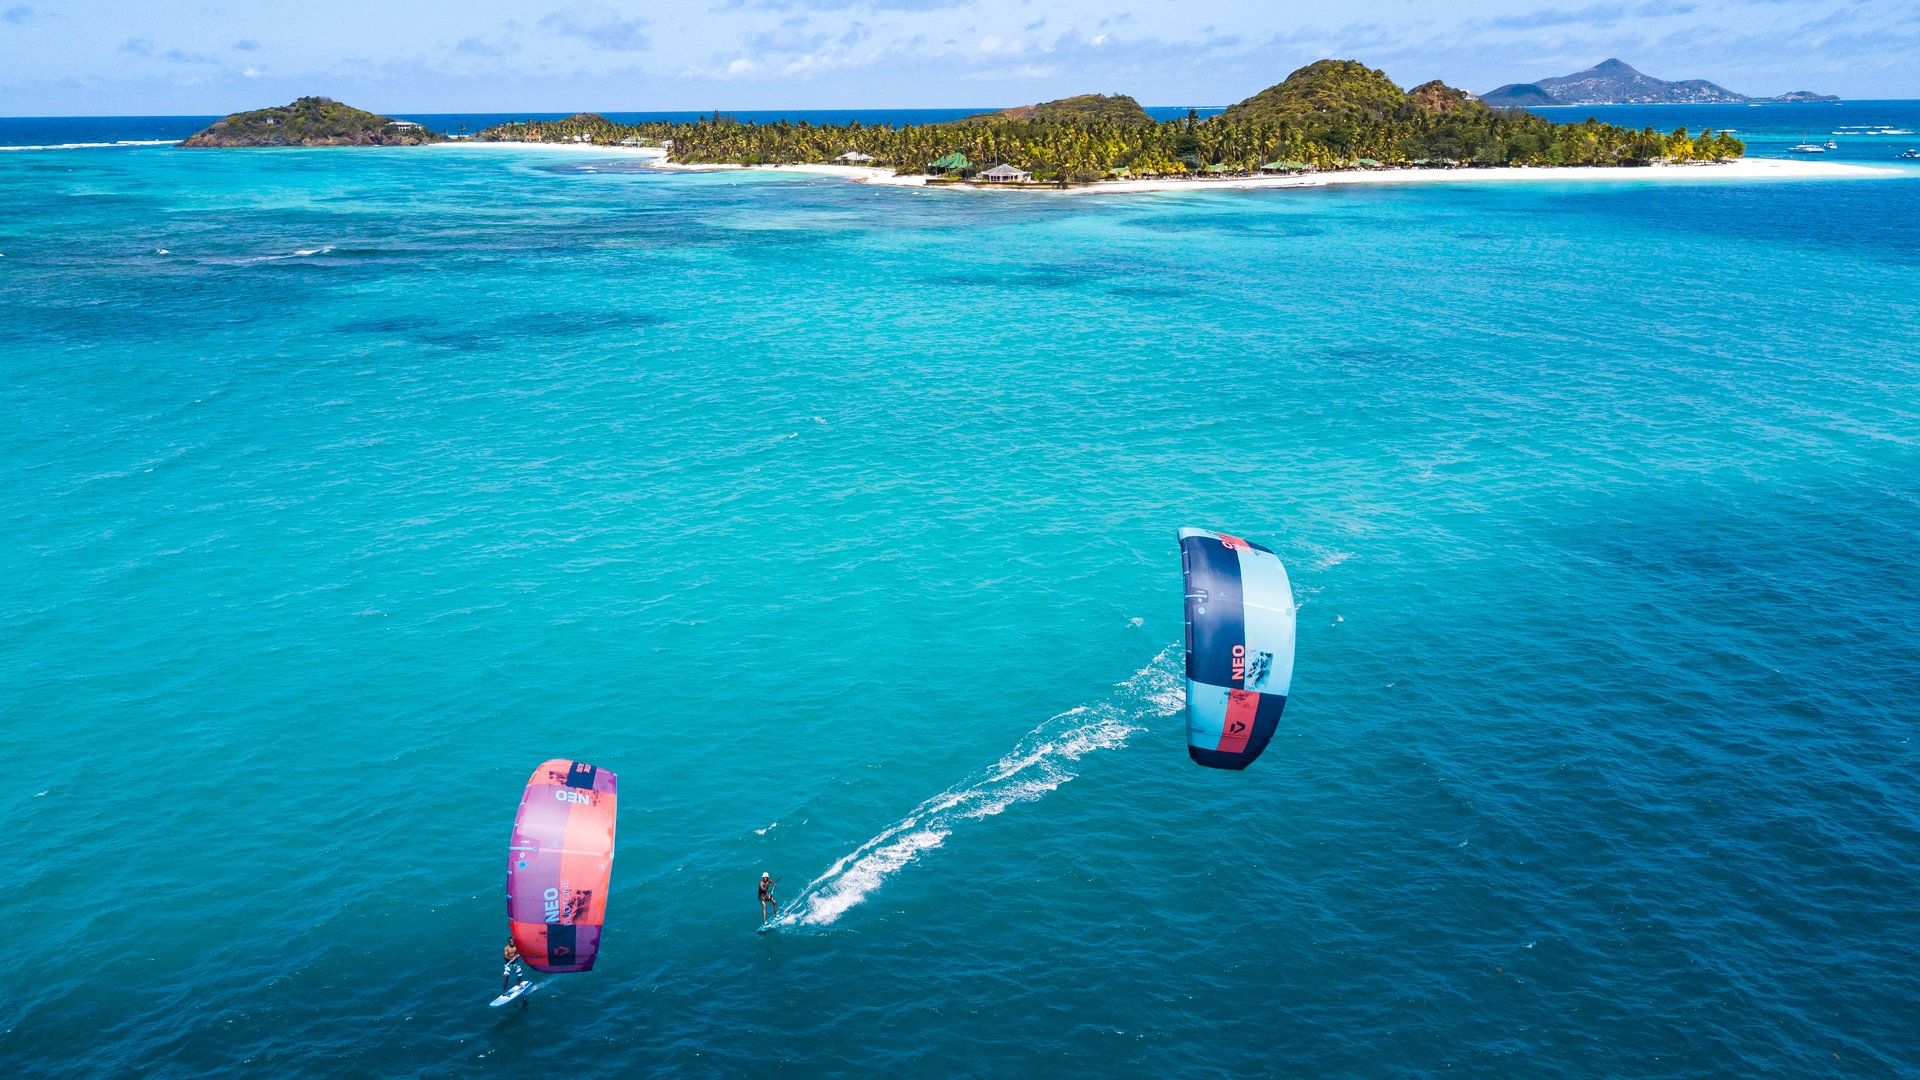 2 kitesurfers having a kite session in front of Palm Island in Saint Vincent and the Grenadines